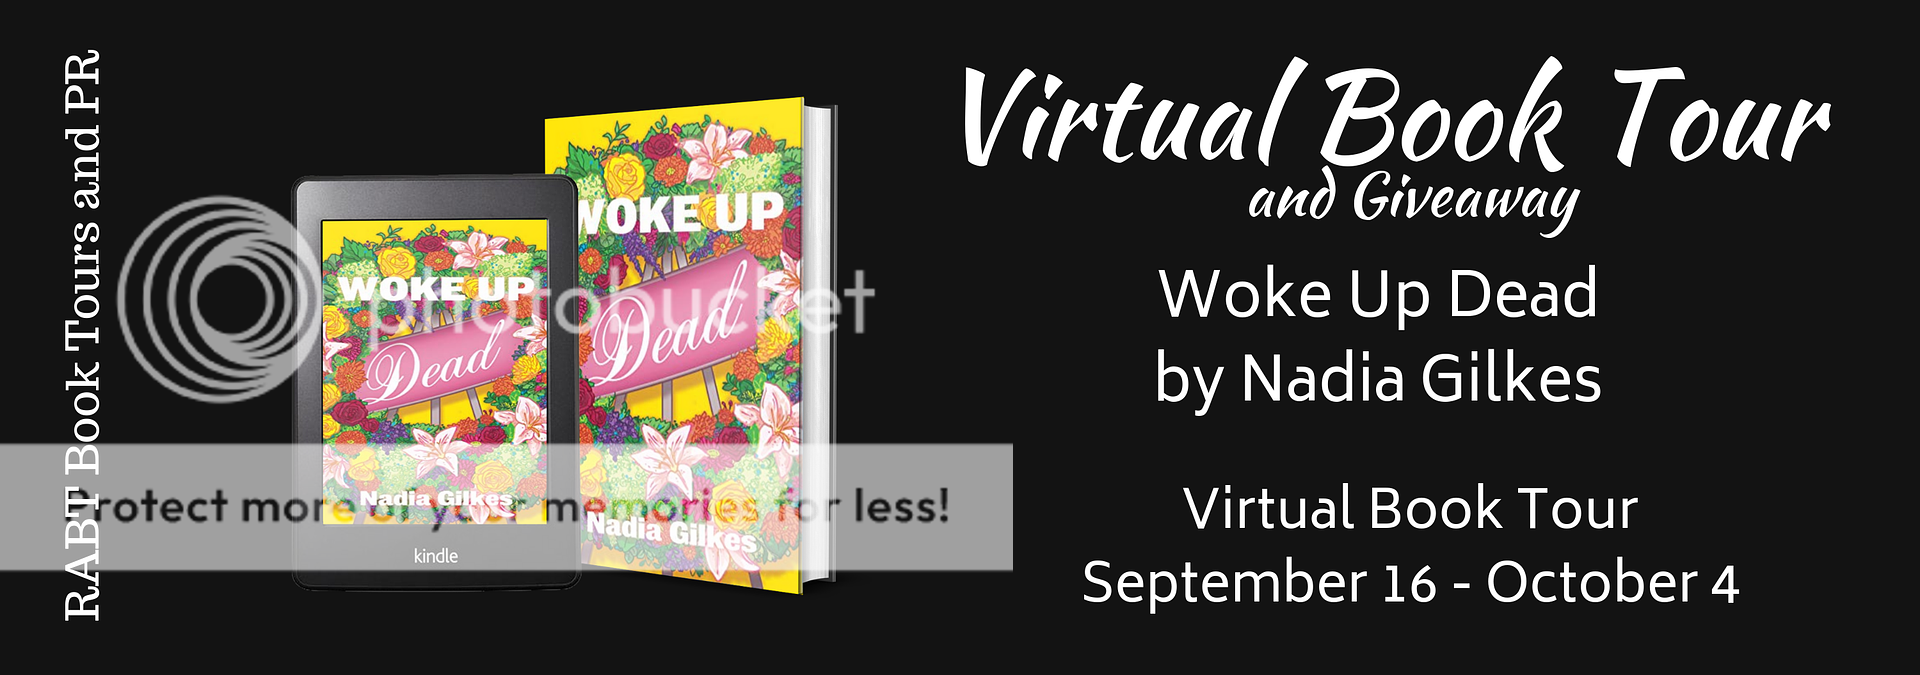 Virtual Book Tour: Woke Up Dead by Nadia Gilkes with my #review and a #giveaway for the #fiction #humor book @RABTBookTours @nadiagilkes